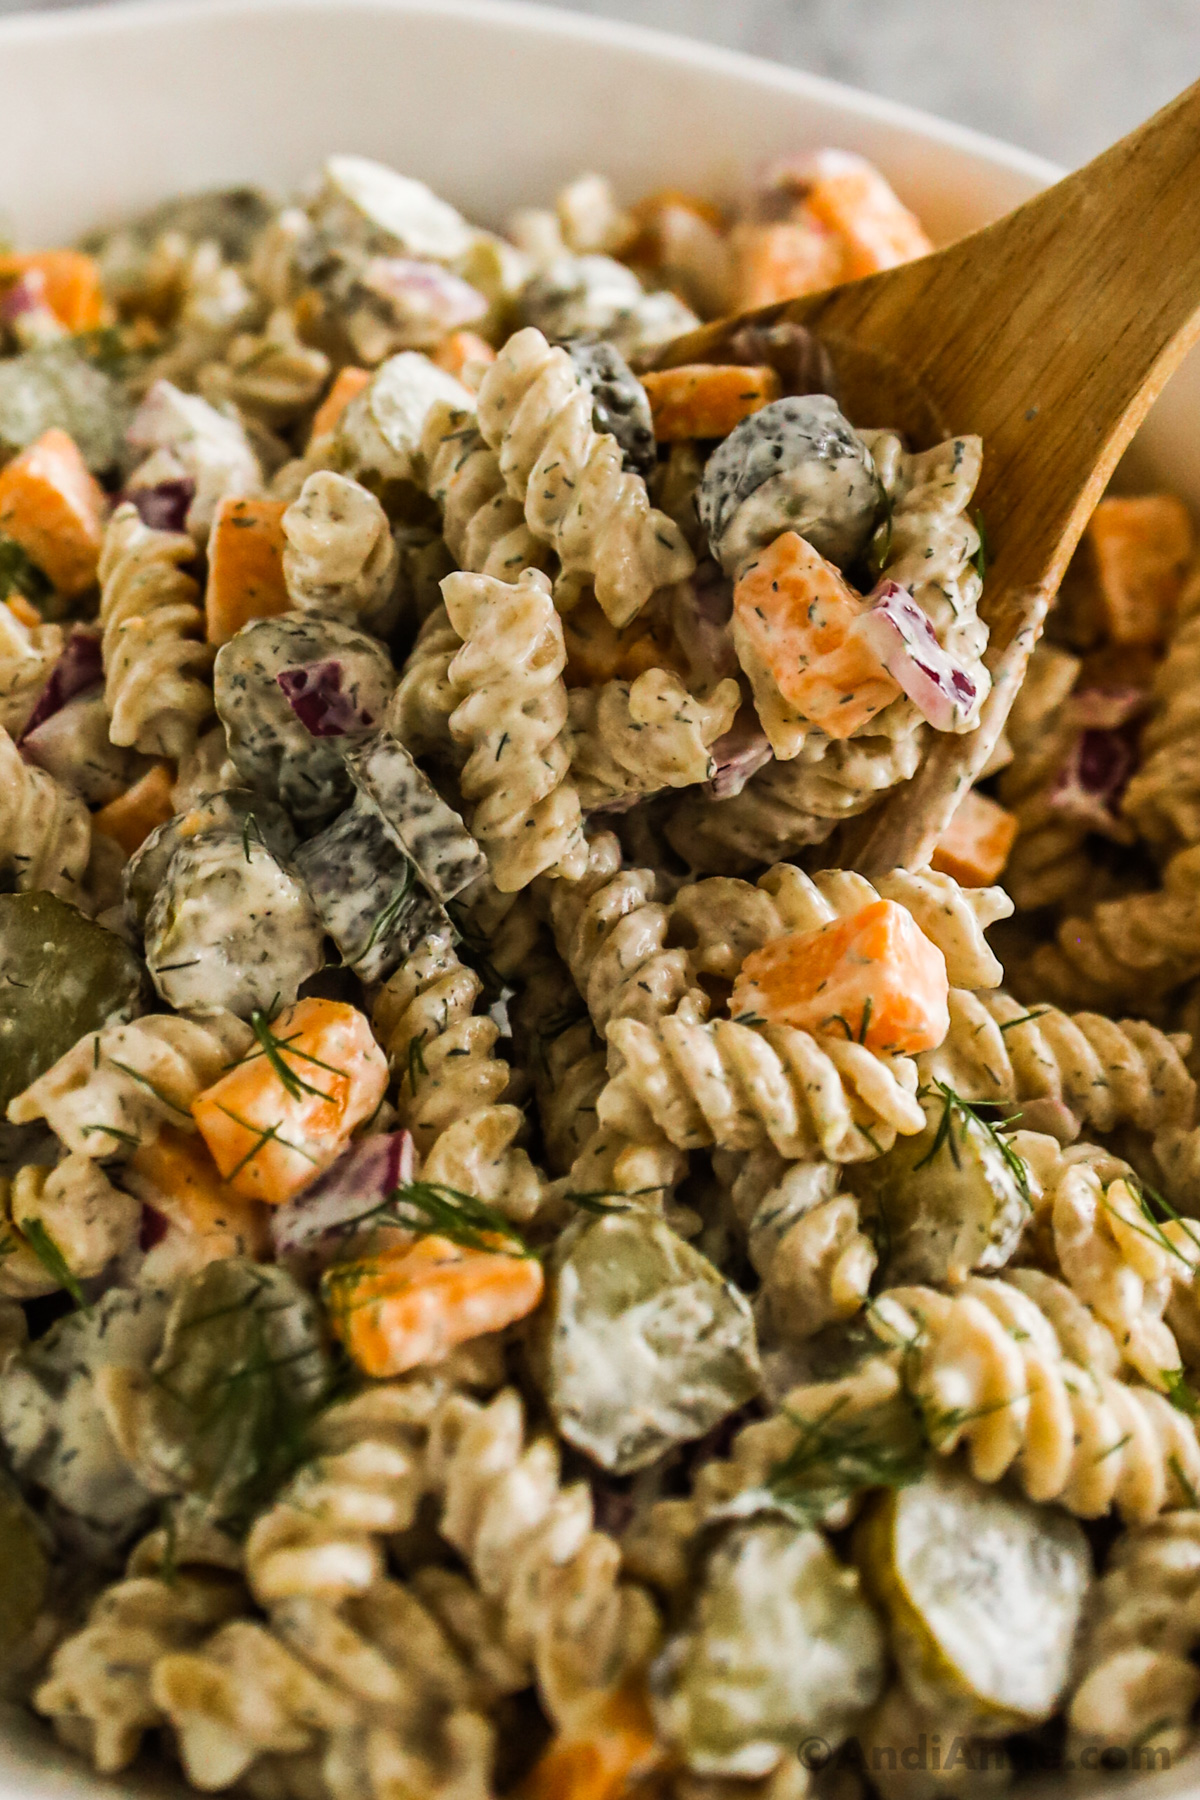 Close up of rotini pasta, cheese, dill pickles and onion, all in a creamy dressing of the pasta salad.